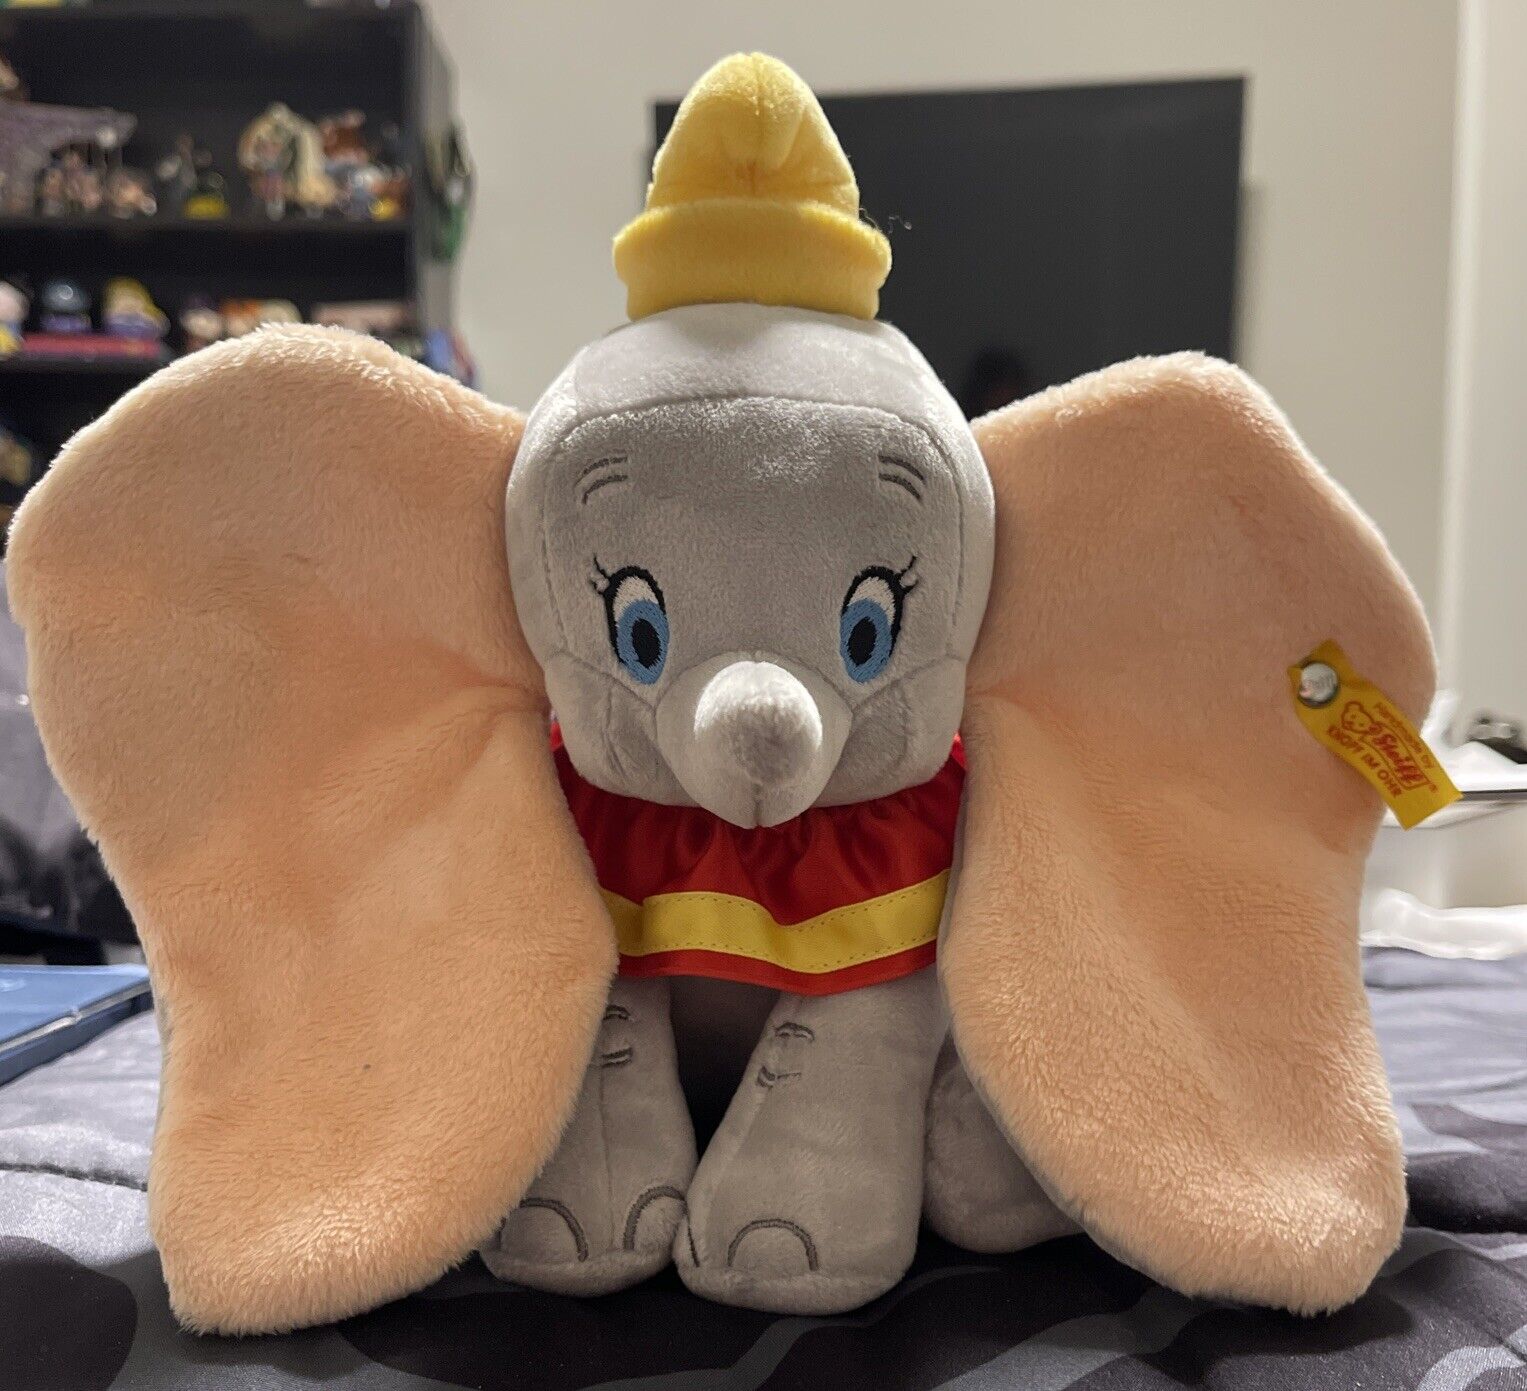 Disney x Steiff Limited Release 8” Dumbo Plush Exclusive Collectable NWT